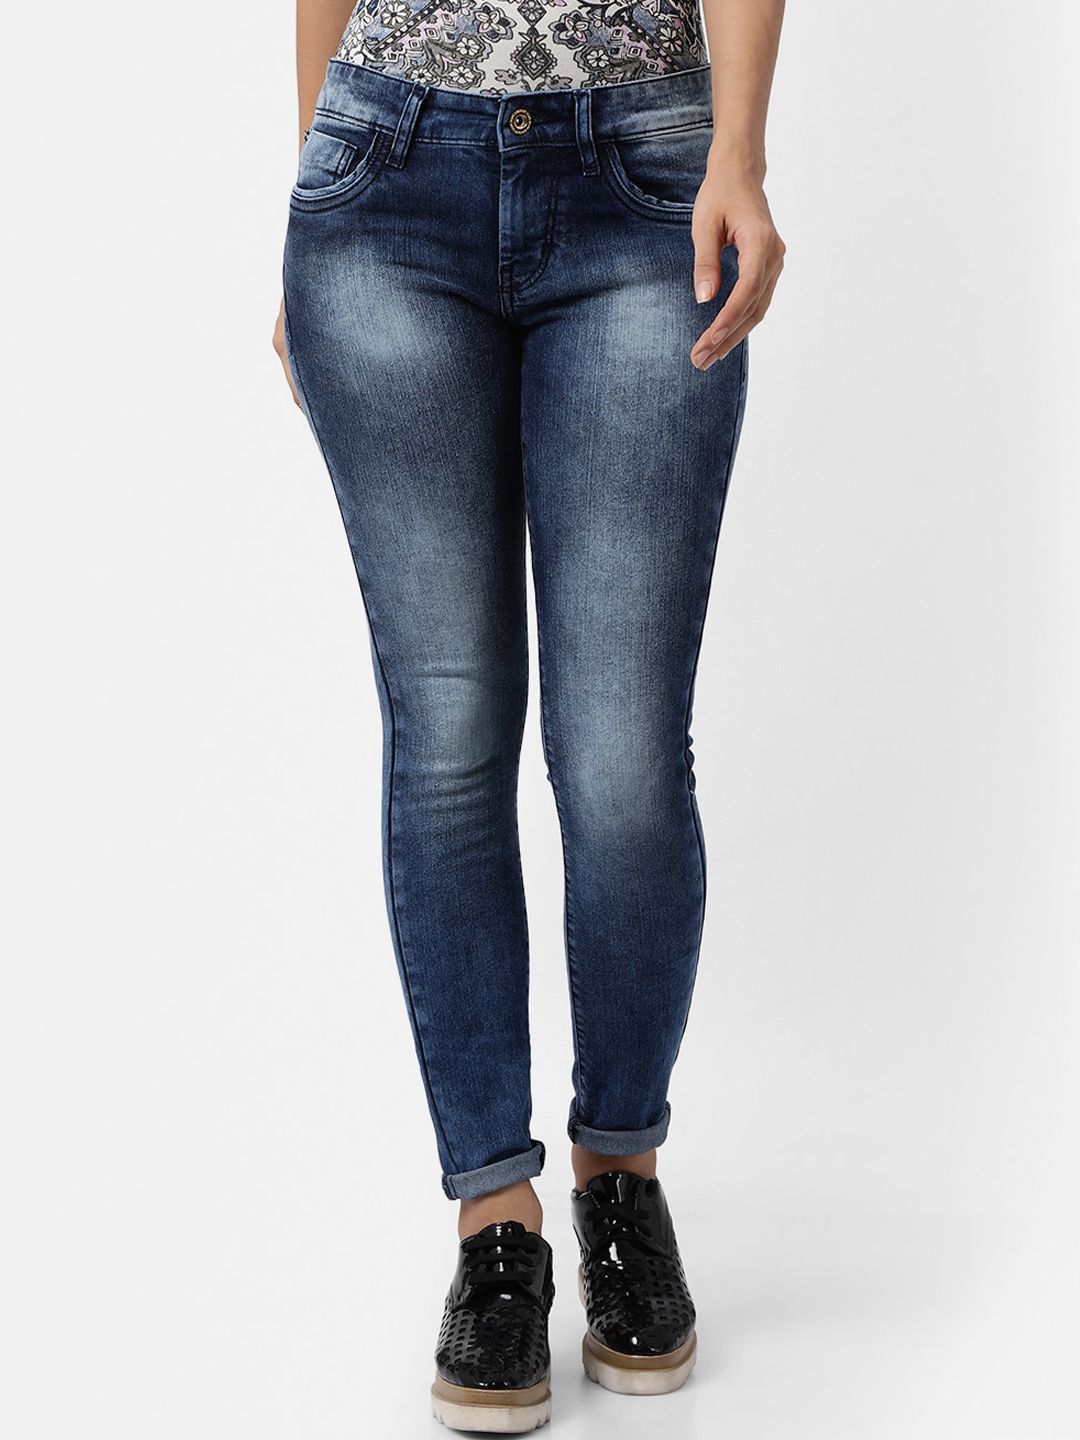 Llak Jeans Women Blue Skinny Fit Heavy Fade Stretchable Jeans Price in India